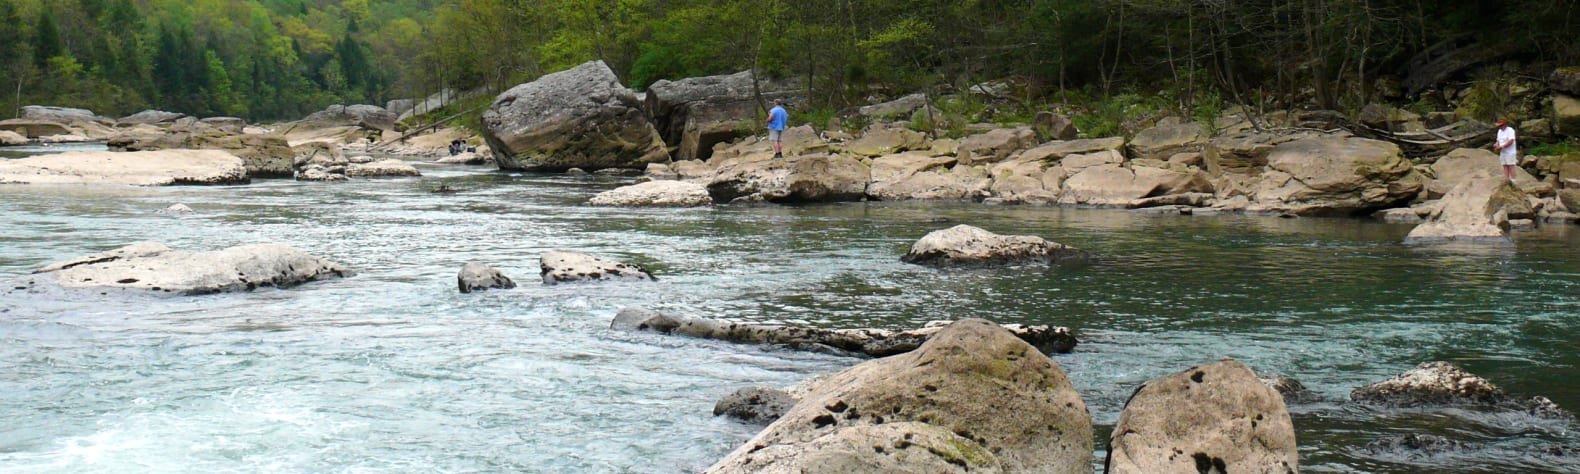 Gauley River National Recreation Area